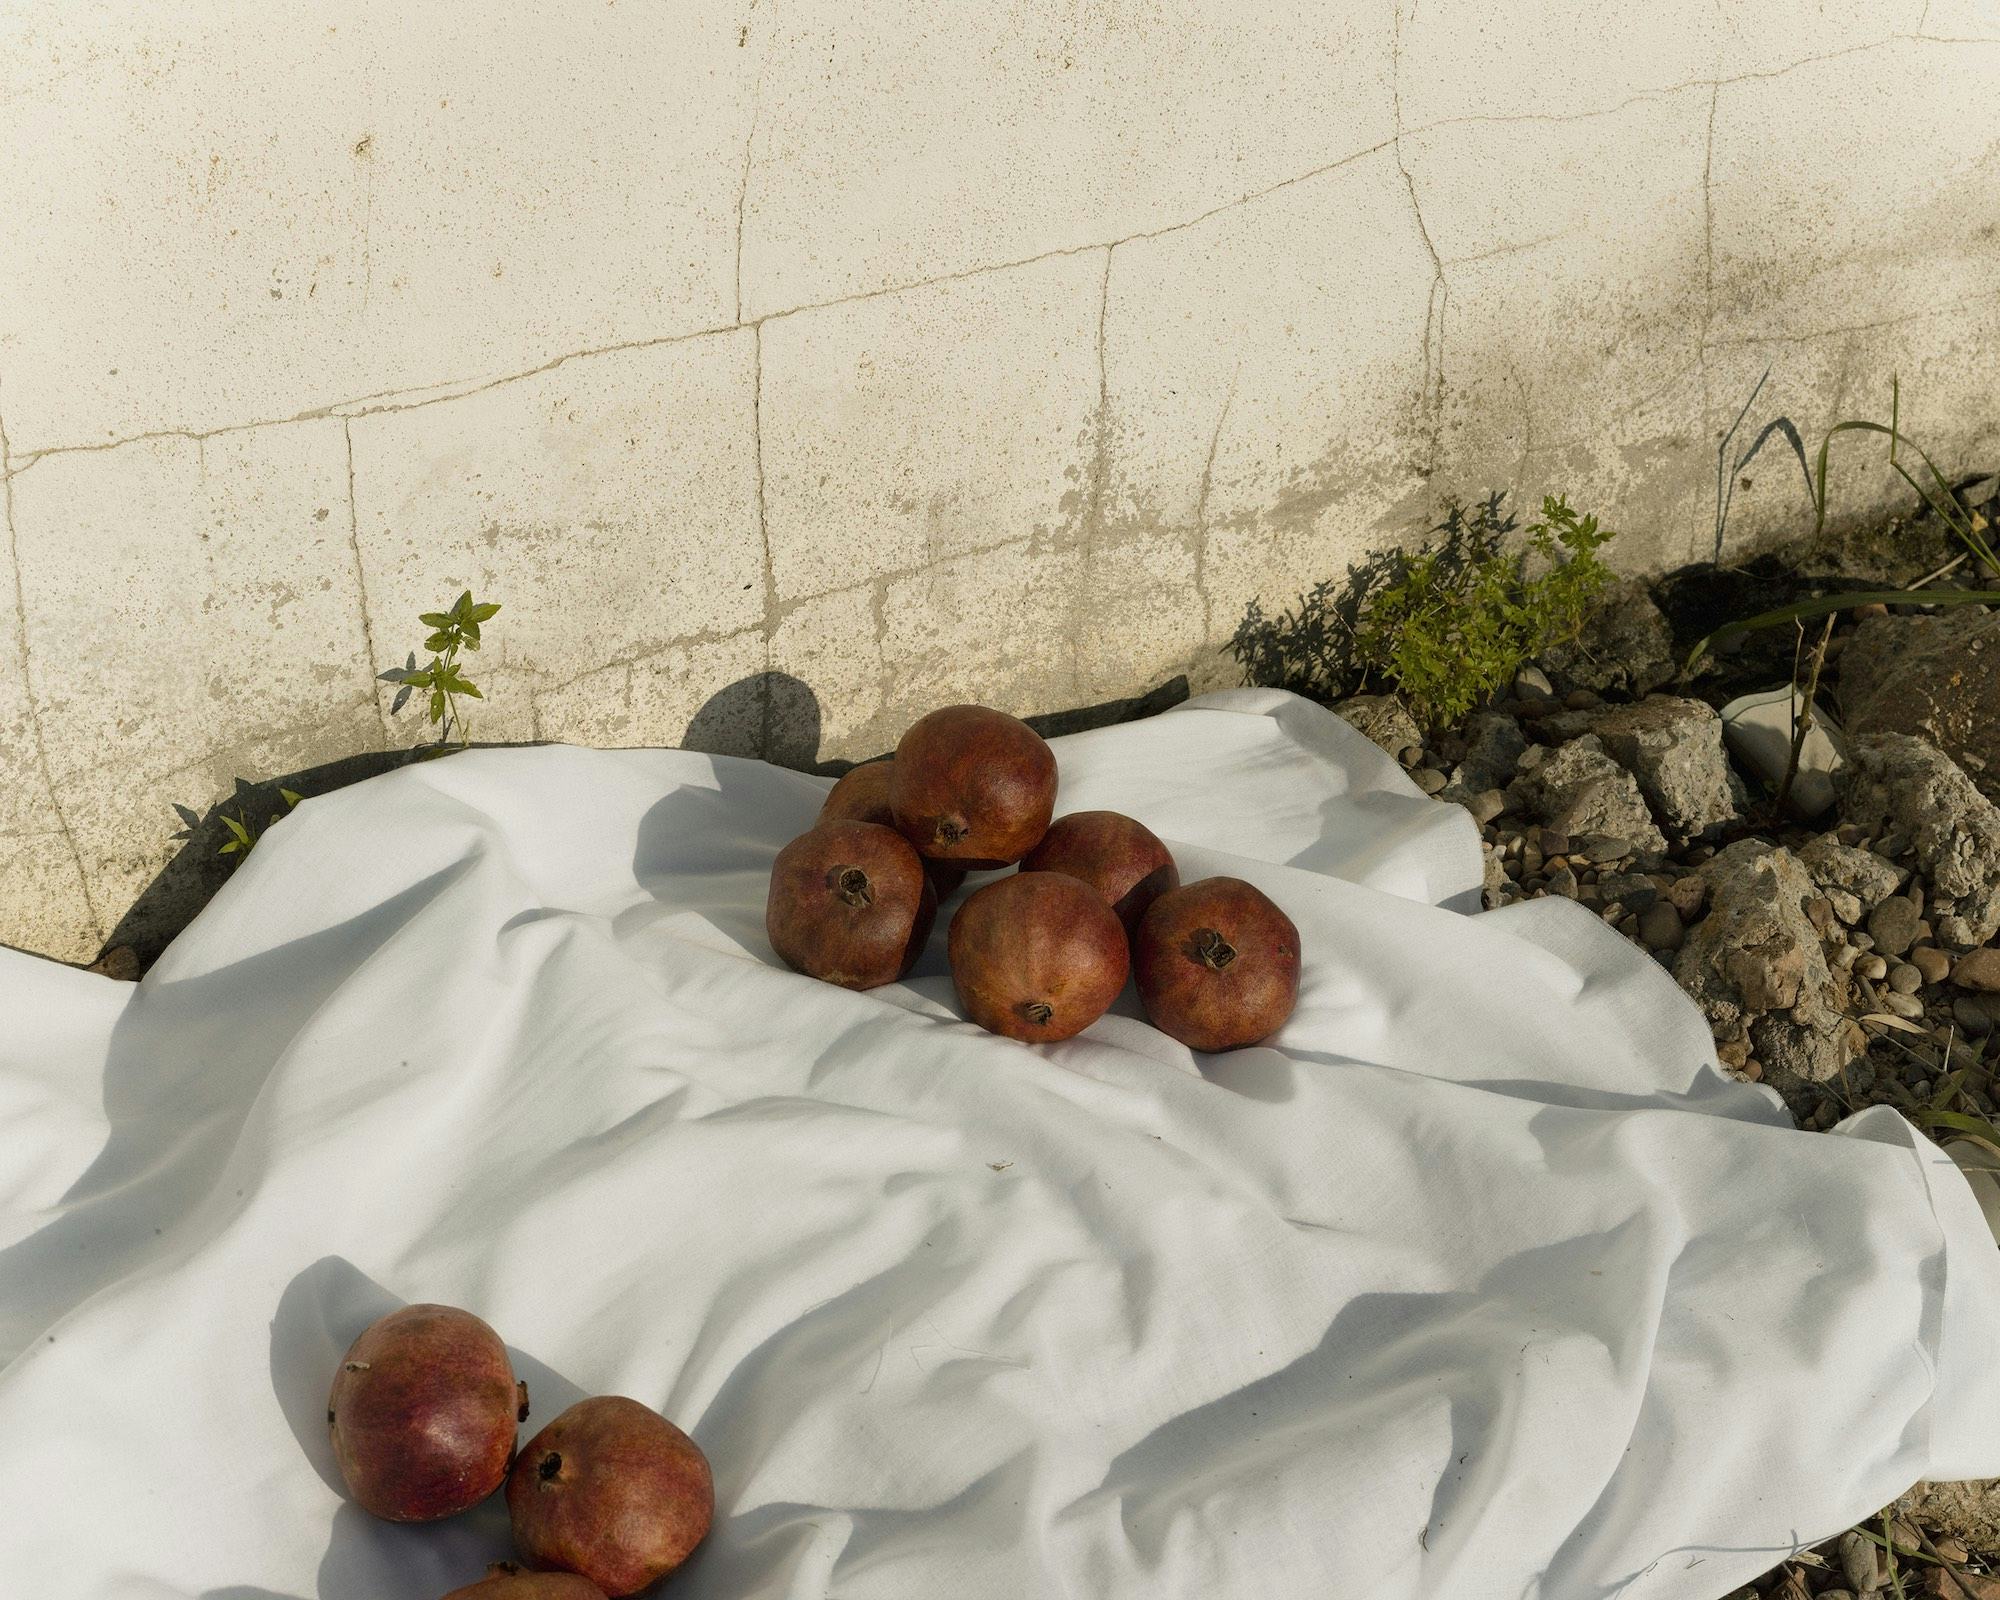 Image of pomegranates on a white table cloth, on a rocky surface in front of a beige, cracked wall. © Felipe Romero Beltrán